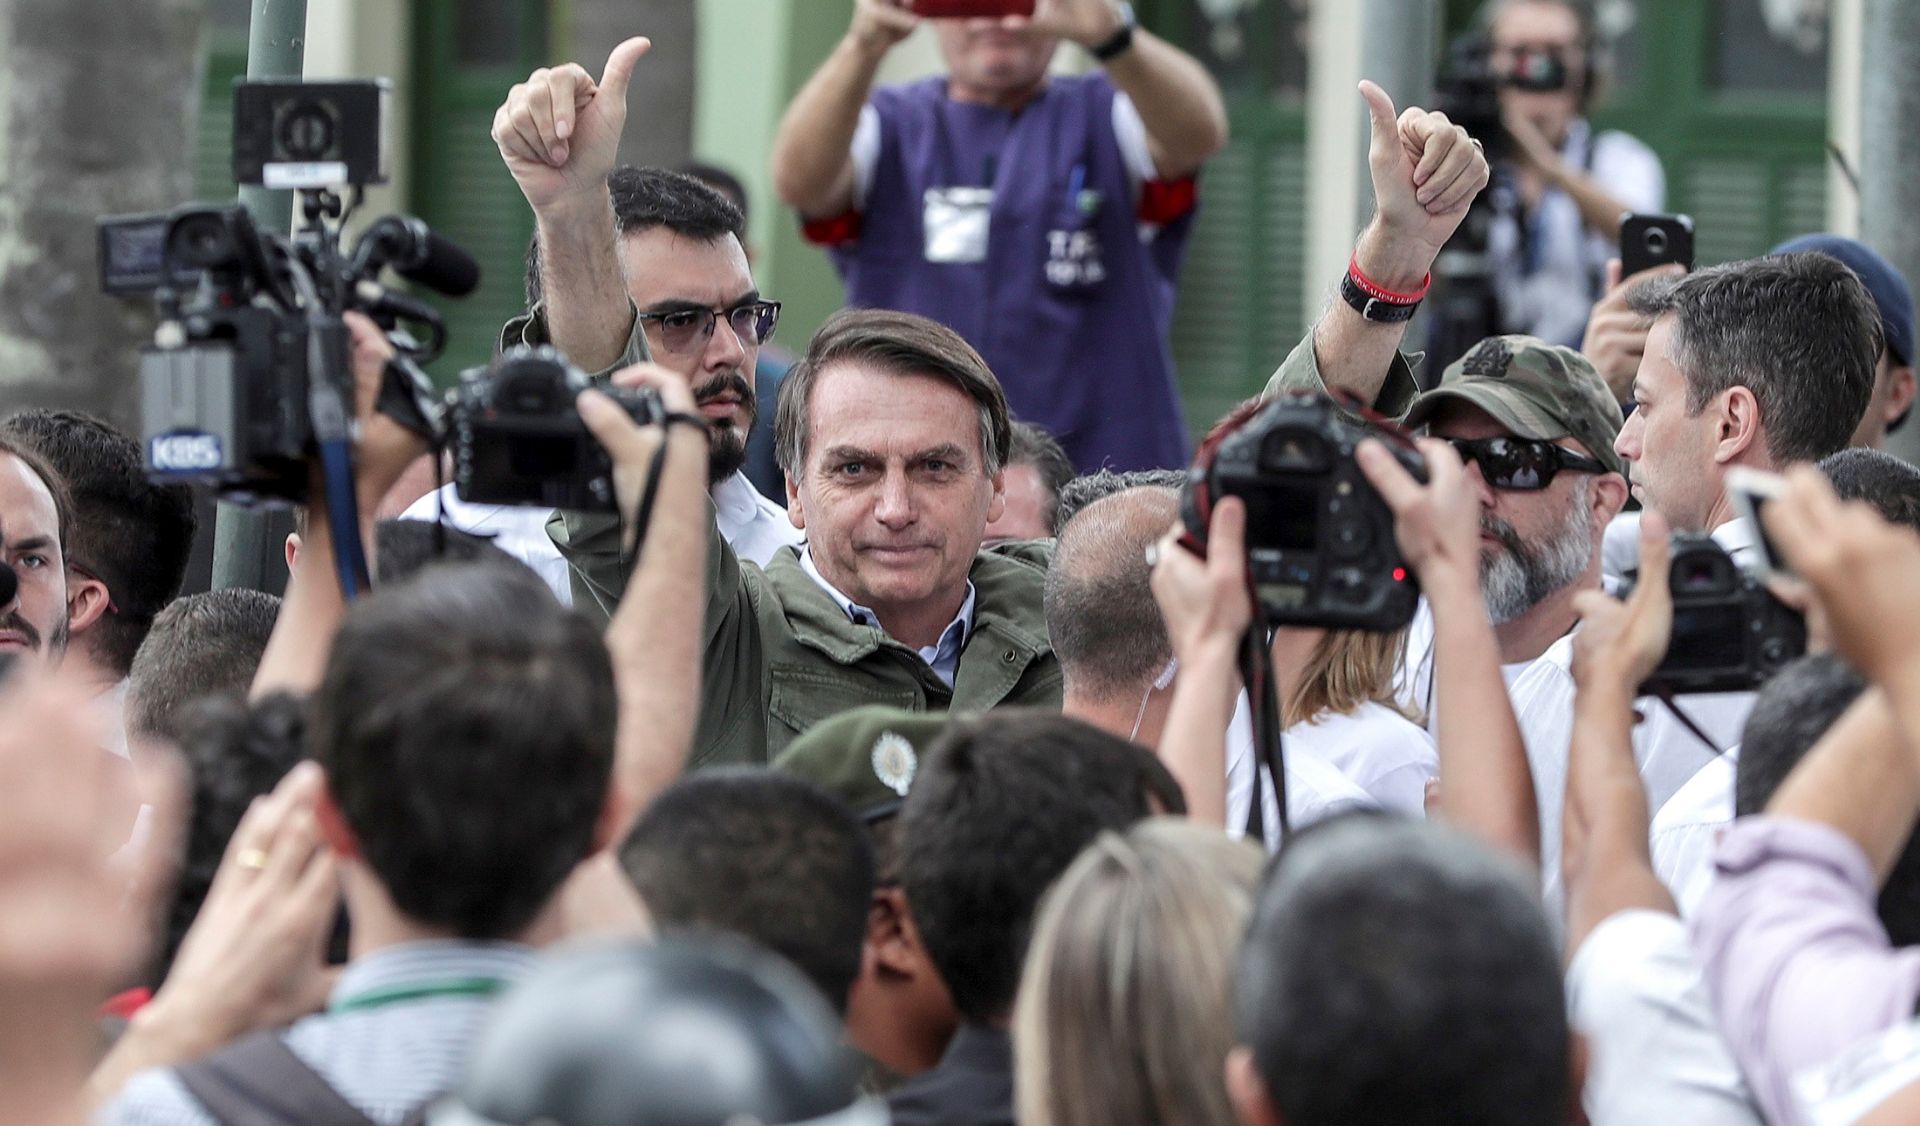 epa07126574 Far-right candidate Jair Bolsonaro (C) of the Social Liberal Party (PSL) gives 'thumb up' to supporters after voting at a polling station in Rio de Janeiro, Brazil, 28 October 2018. Brazilians are called to vote in the second round of the country's presidential elections, where far-right candidate Jair Bolsonaro is favorite to win in all surveys. Fernando Haddad of the Workers Party will face Jair Bolsonaro, of the Social Liberal Party (PSL) in the second round of voting.  EPA/ANTONIO LACERDA